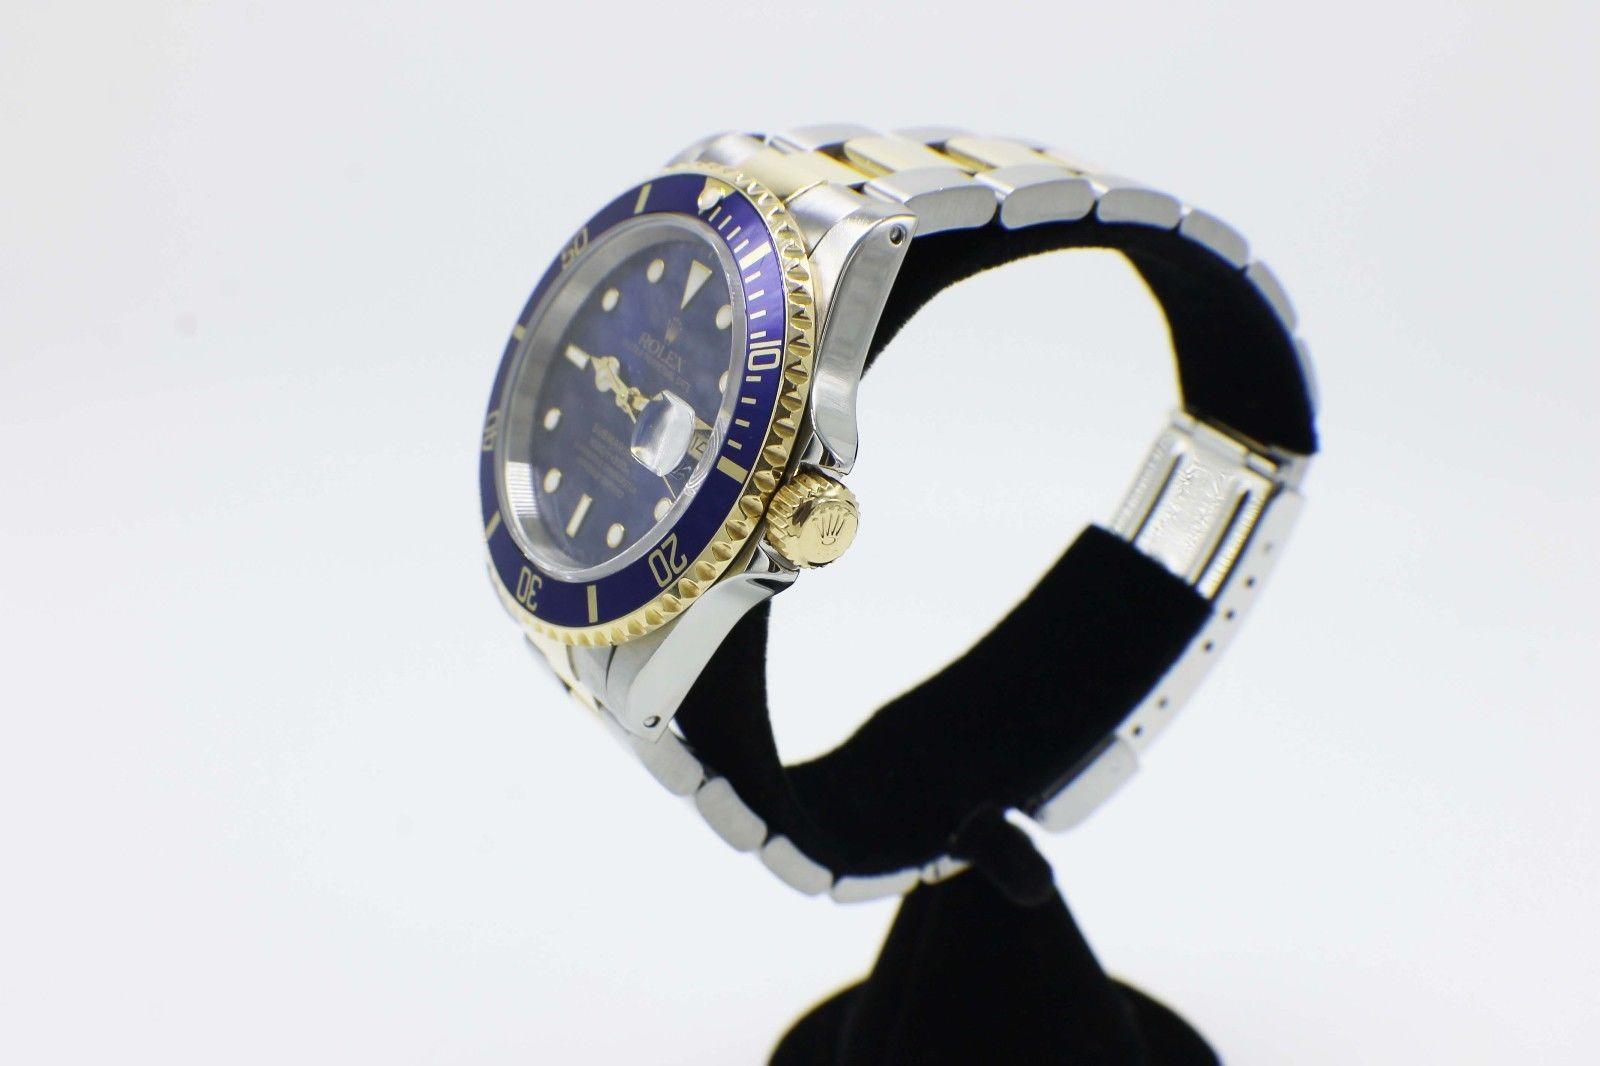 Rolex Submariner Blue 16613 18 Karat Gold and Stainless Steel Box and Papers 1